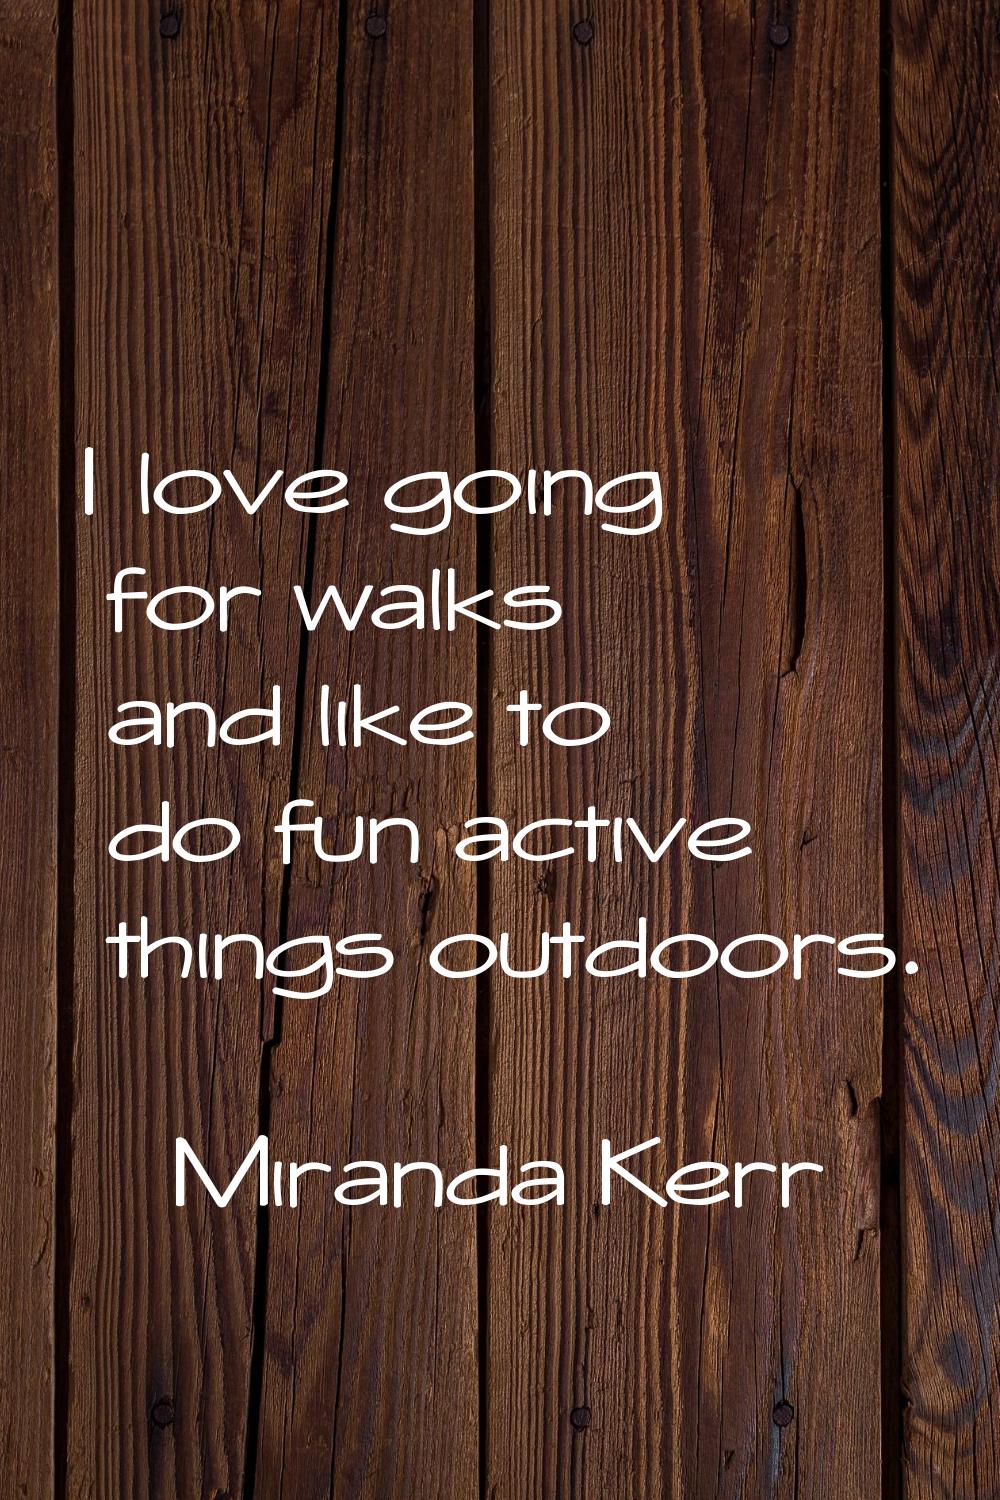 I love going for walks and like to do fun active things outdoors.